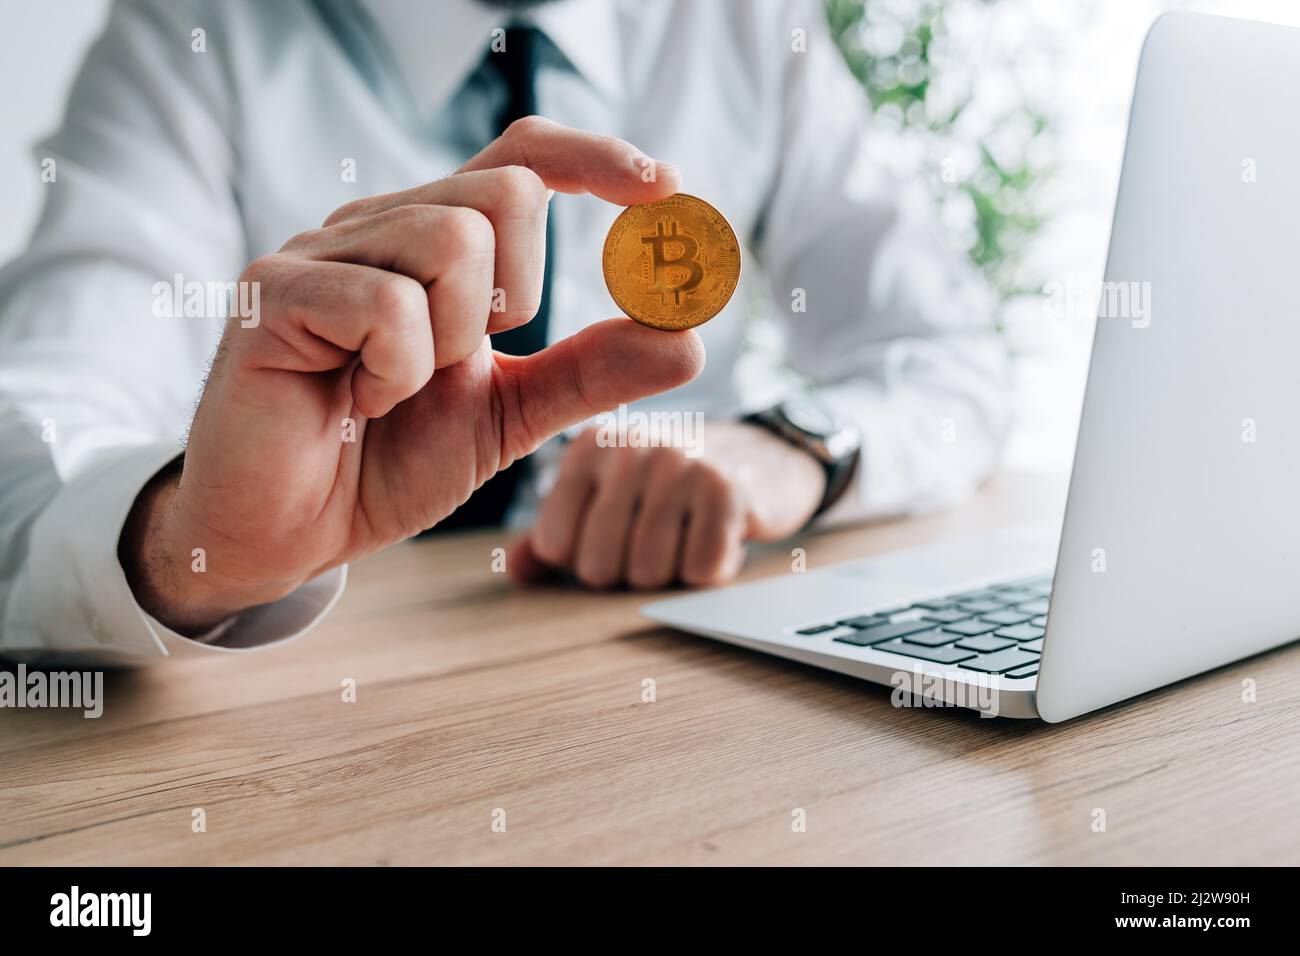 Bitcoin cryptocurrency investor concept, businessman offering one crypto currency coin, selective focus Stock Photo